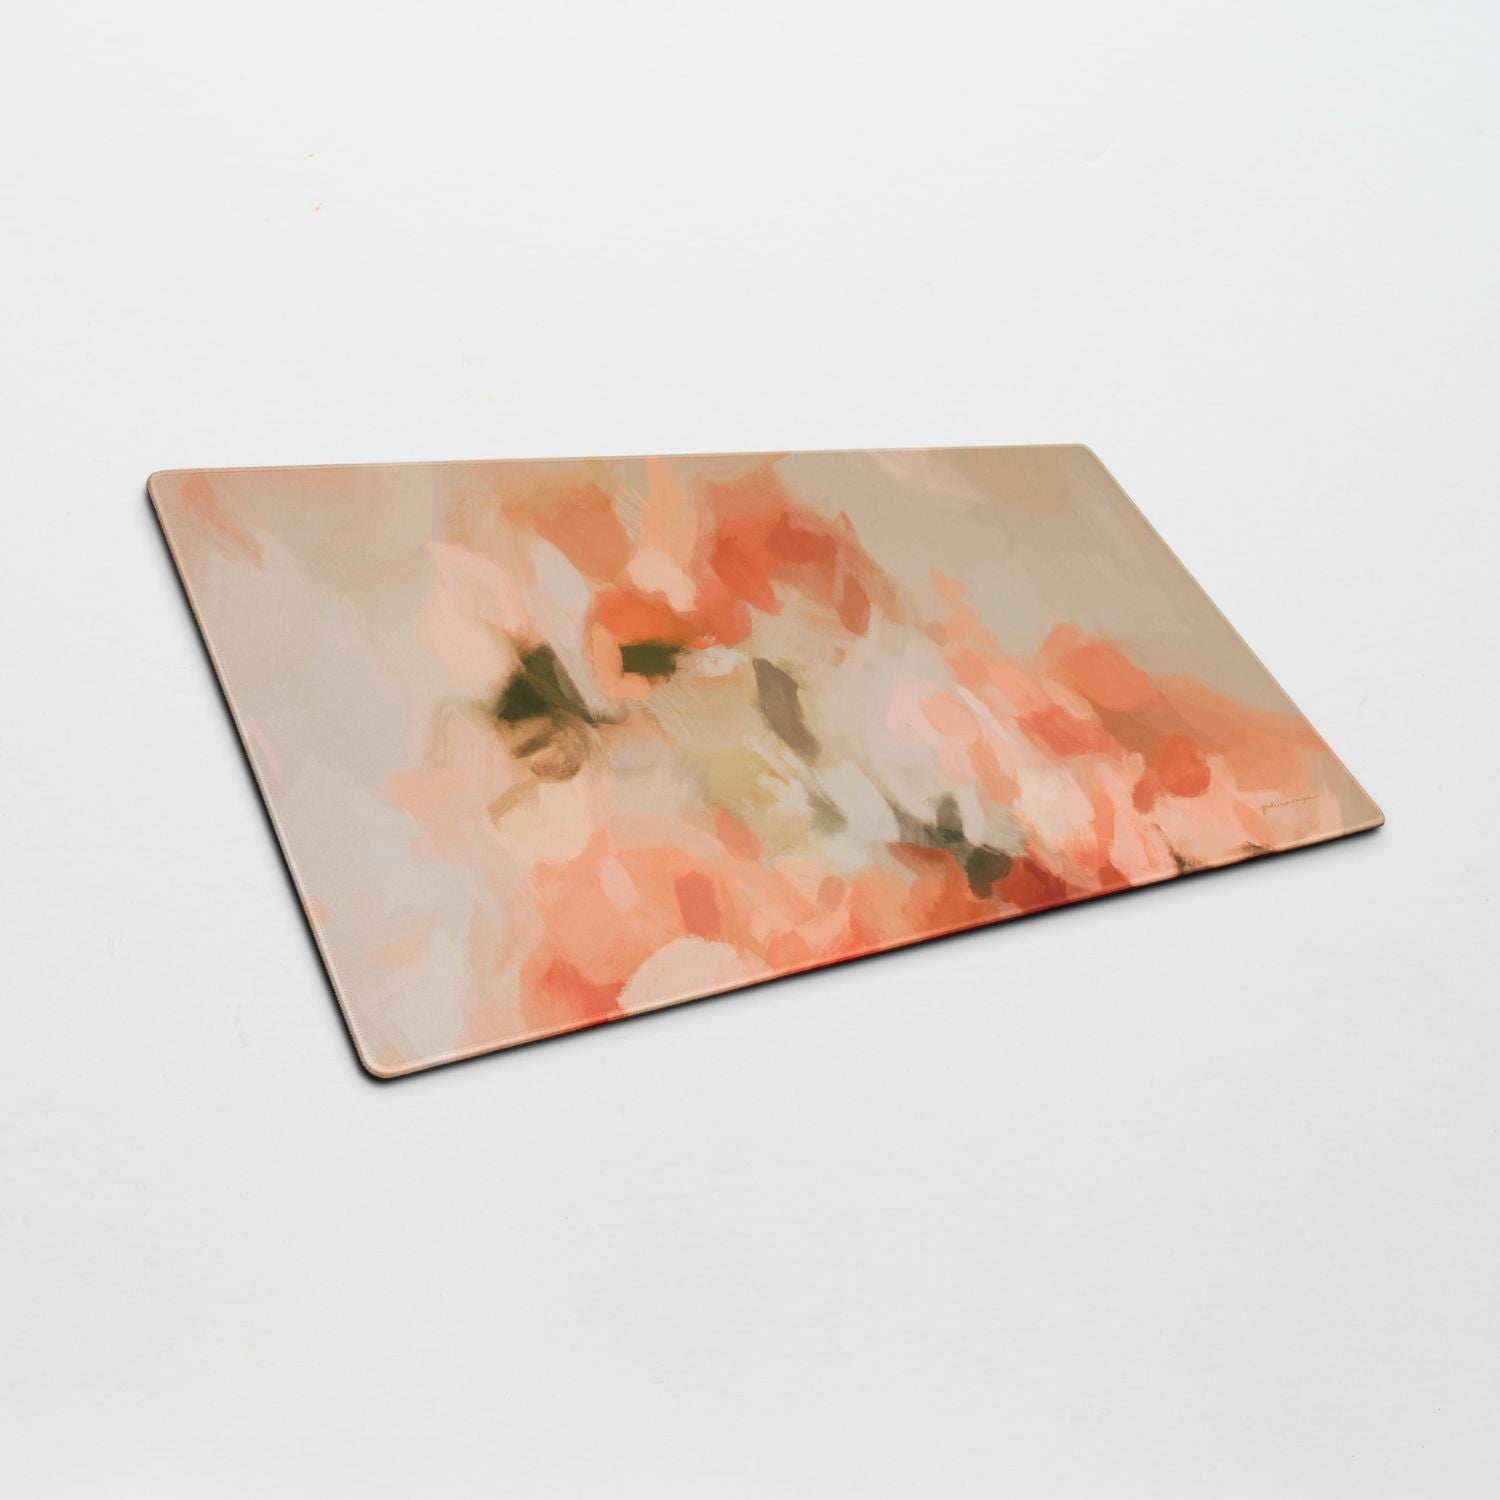 Sweet Nectar, colorful mouse pad for styling your office desk. Featuring artwork by Parima Studio. Home office styling accessories, cubicle styling accessories.